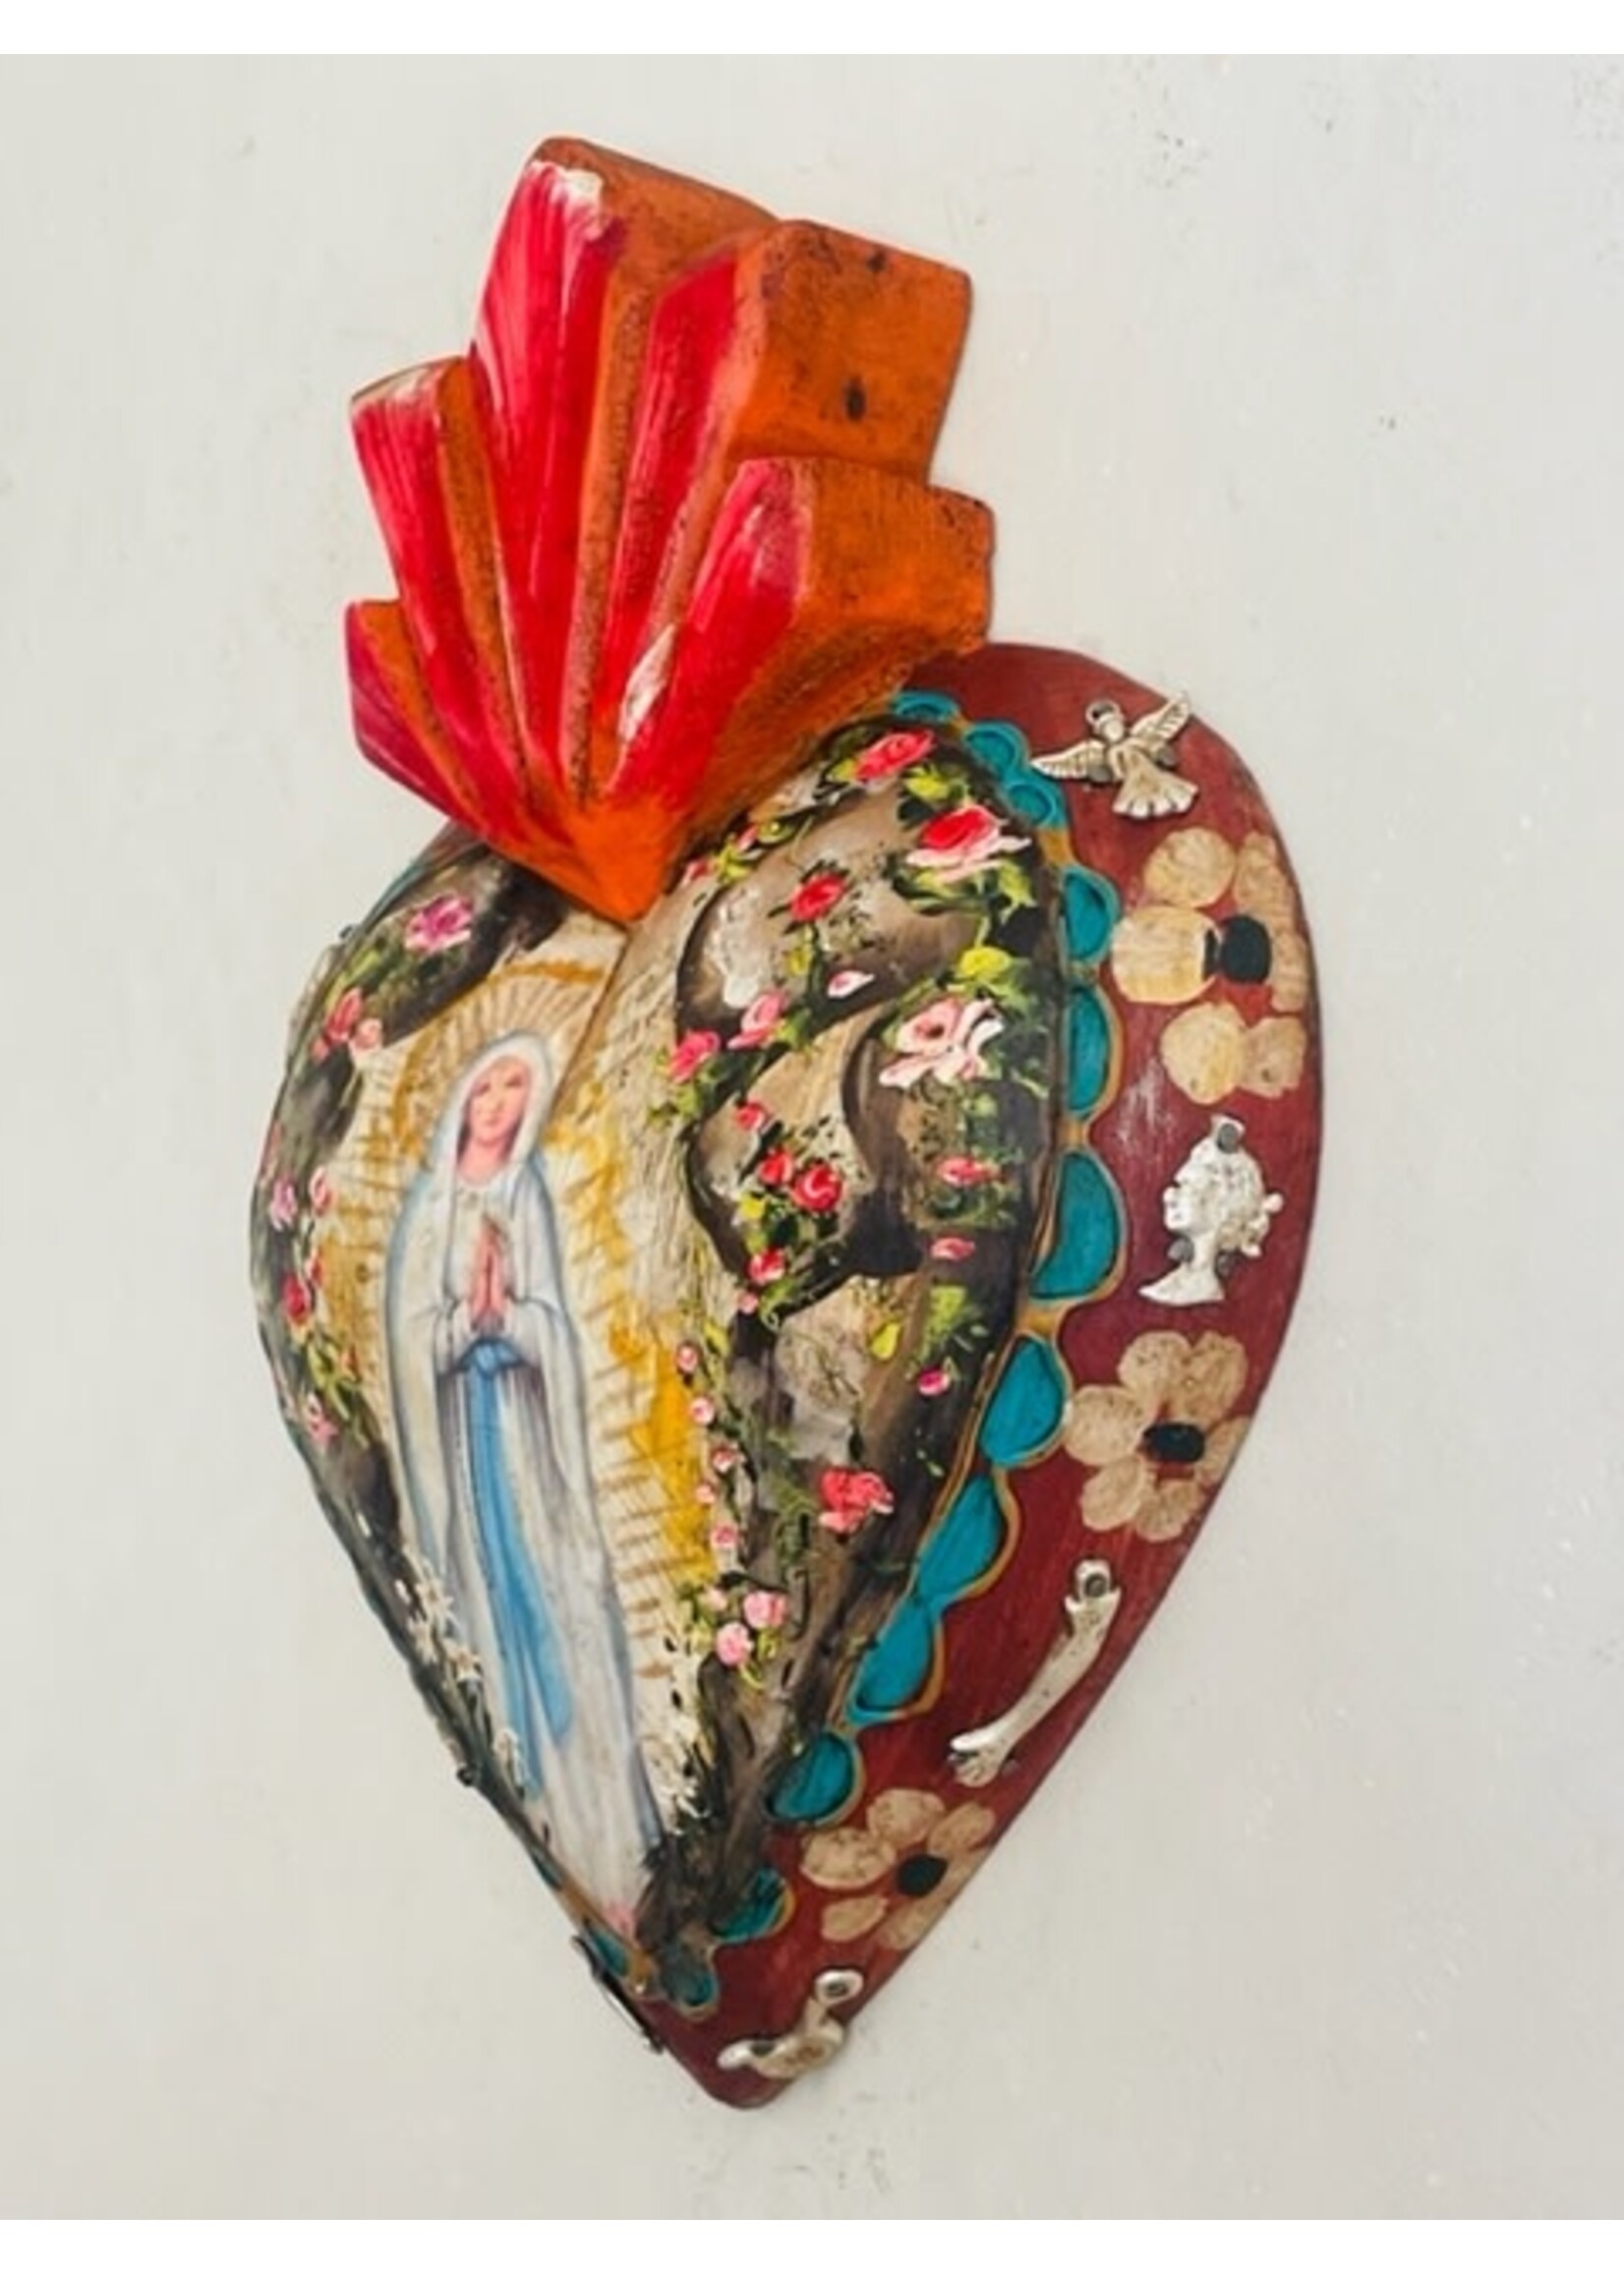 Our Lady of Lourdes handmade wood heart